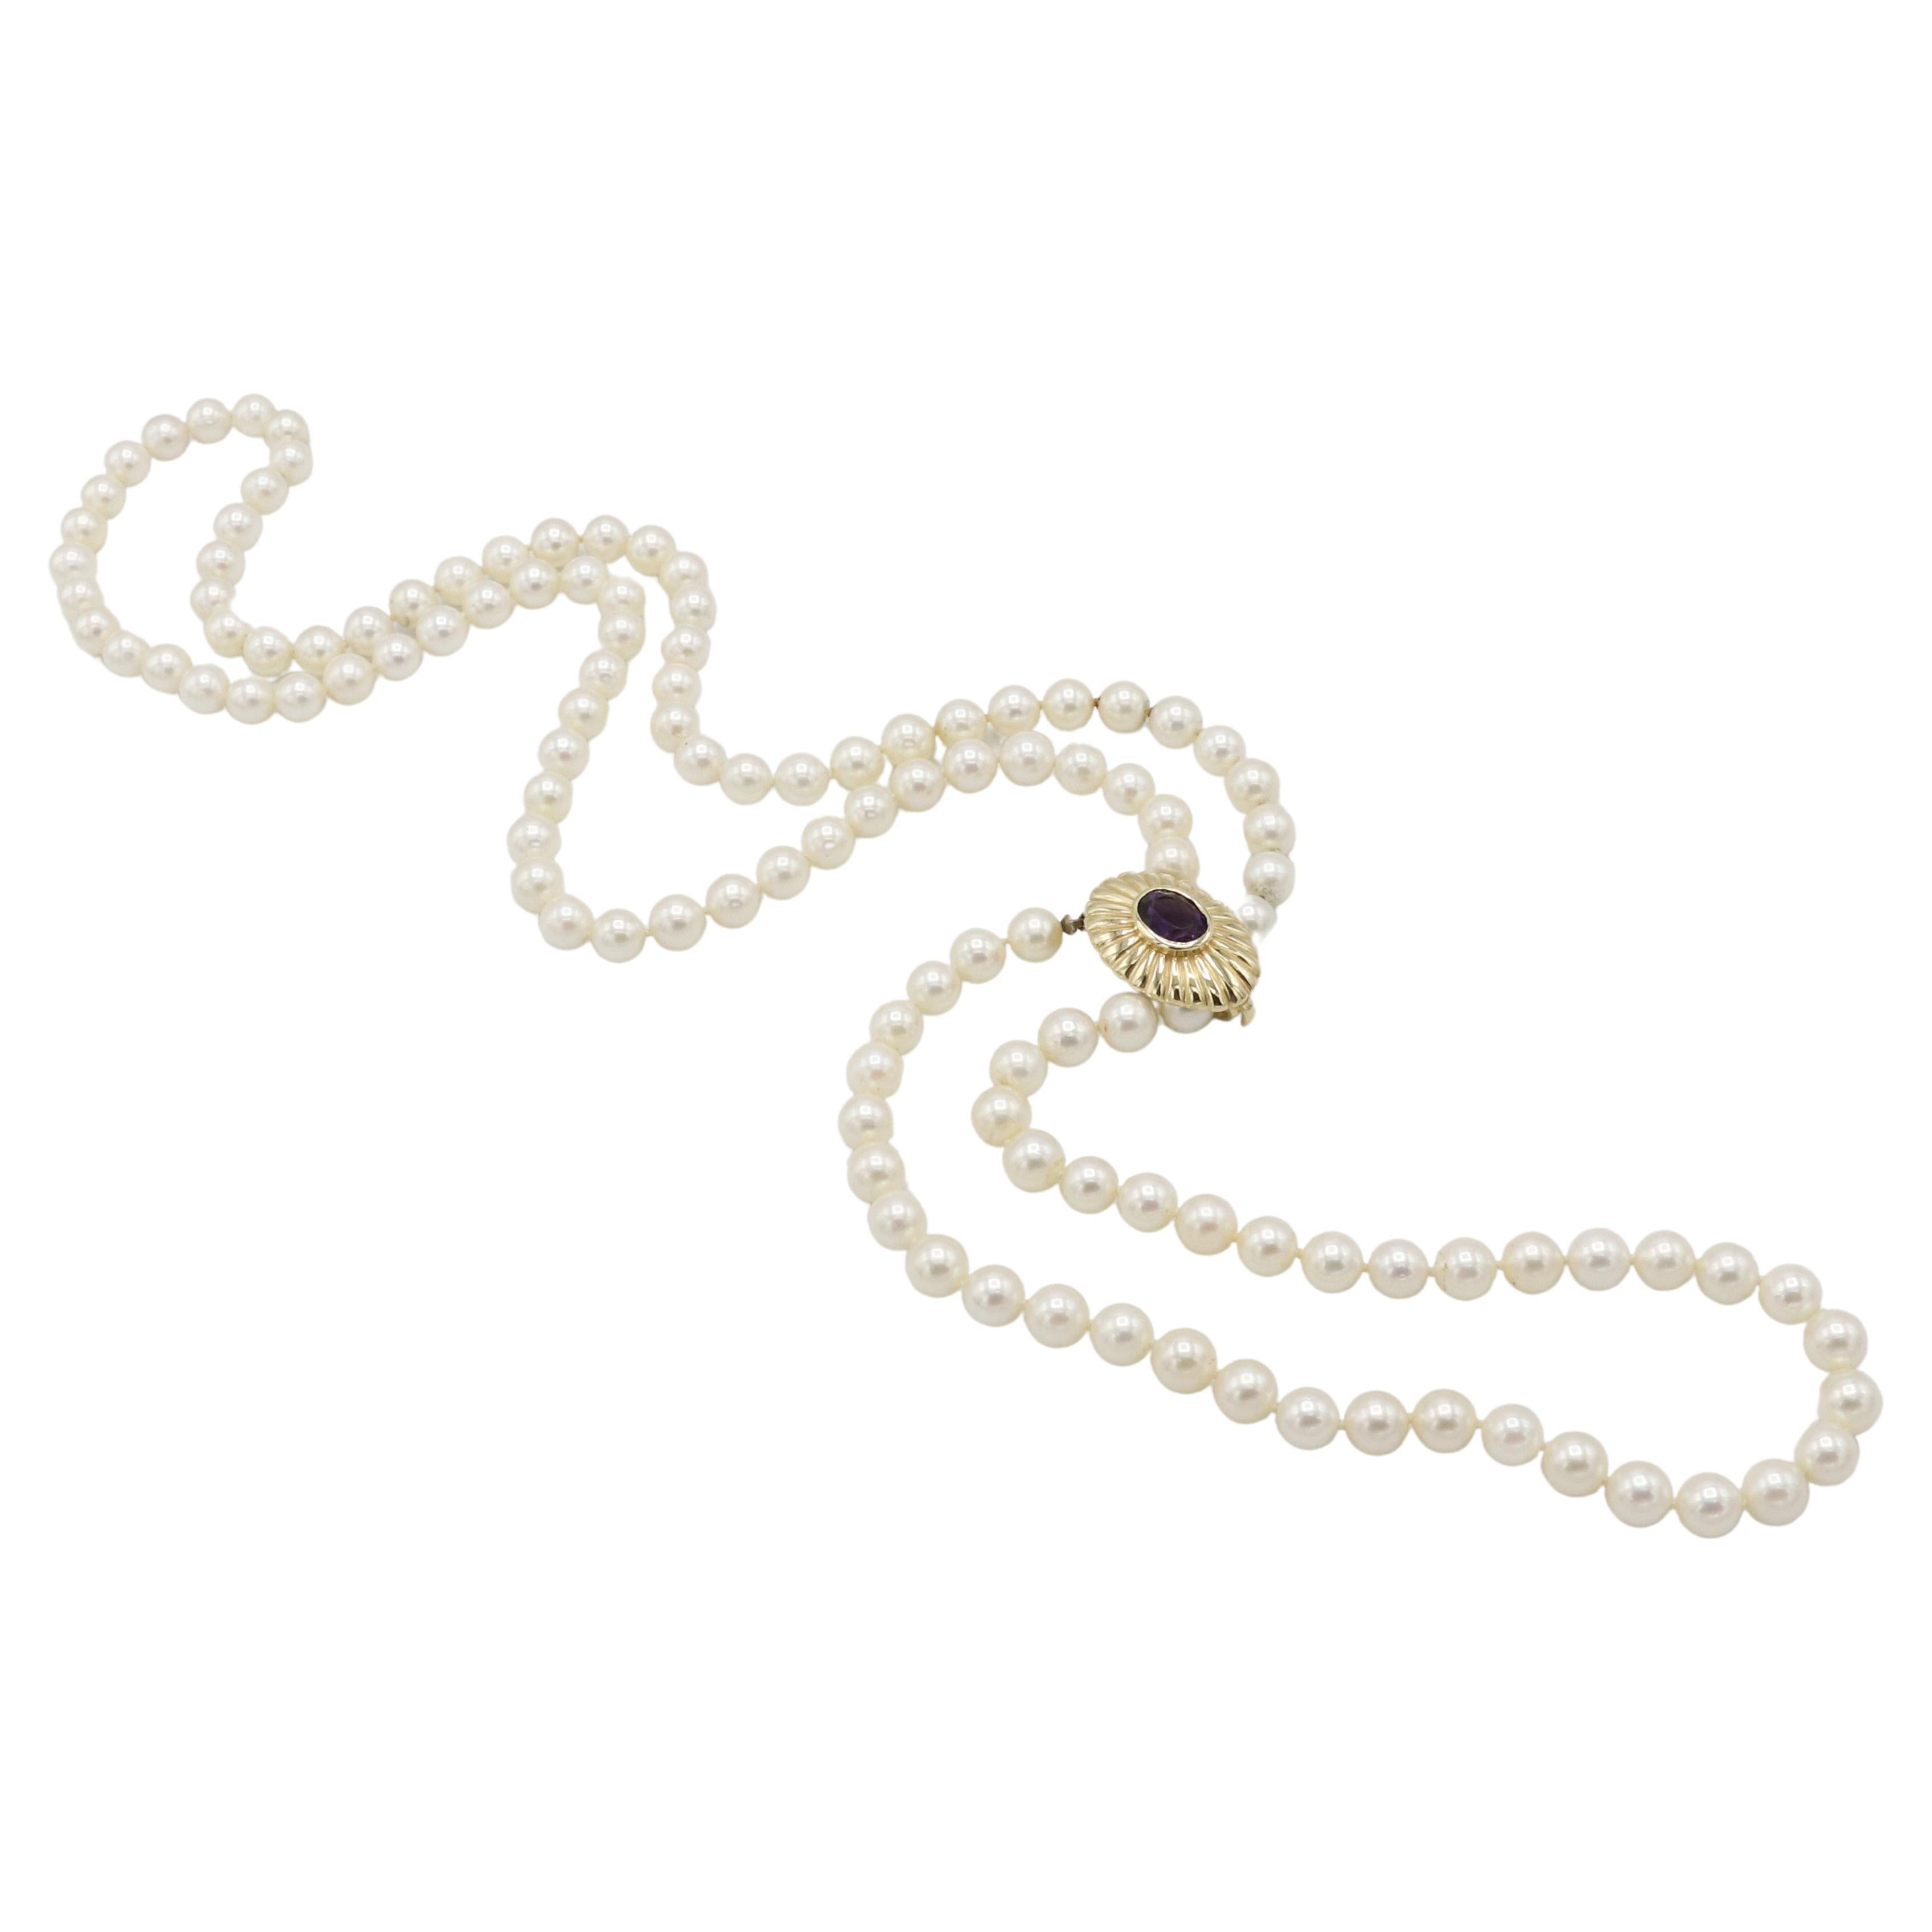 7mm Cultured Pearl Necklace with Adjustable 14 Karat Yellow Gold and Amethyst Stone Clasp 

Metal: 14k yellow gold
Weight: 60 grams
Length 34 inches
Pearls: 7mm cultured white pearls with creamy luster
Clasp: 23 x 17mm
Gemstone: Amethyst
